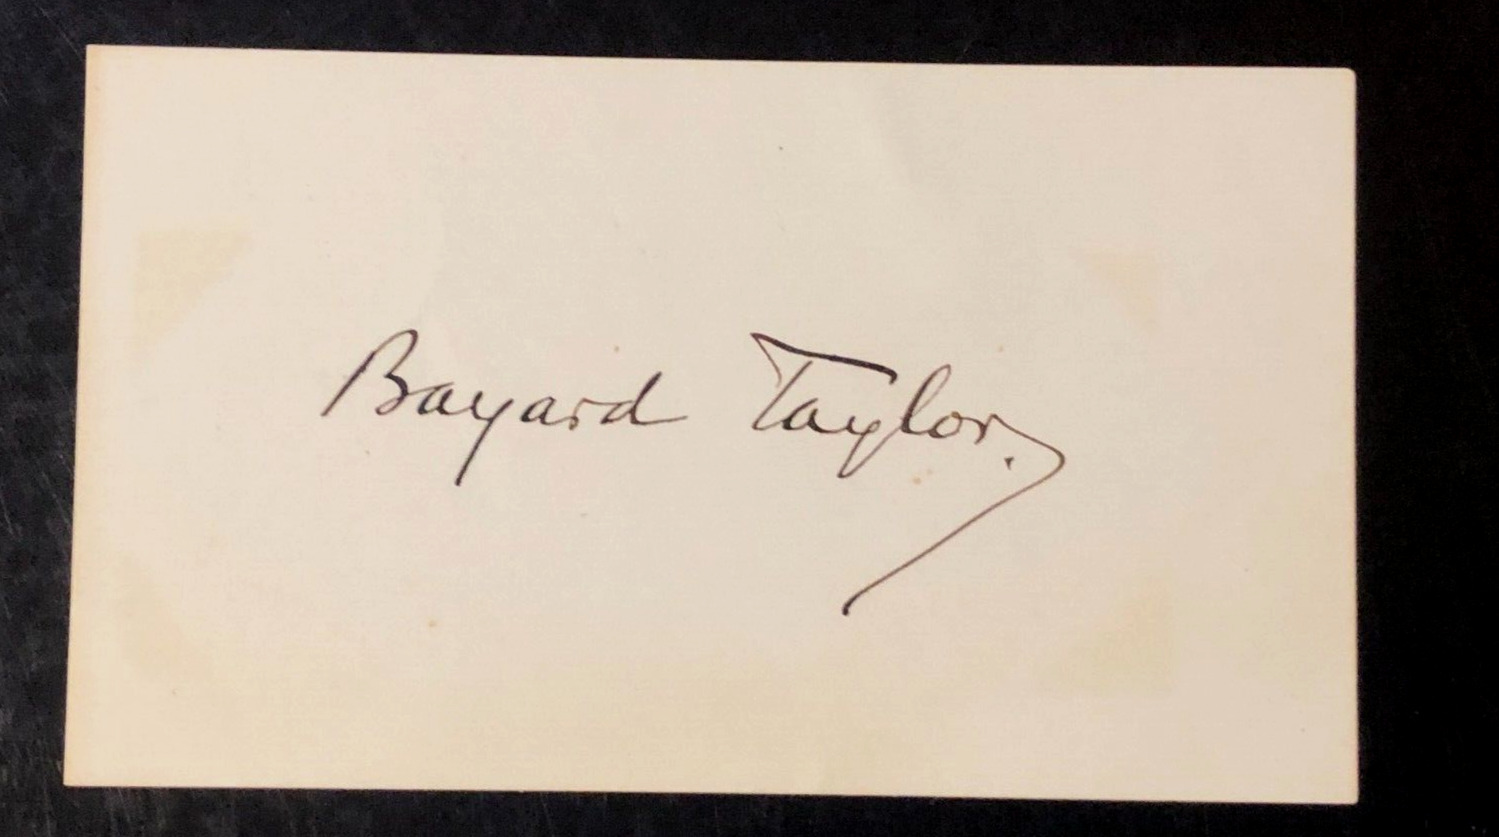 Bayard Taylor Signed Card - American poet, literary critic, author, and diplomat